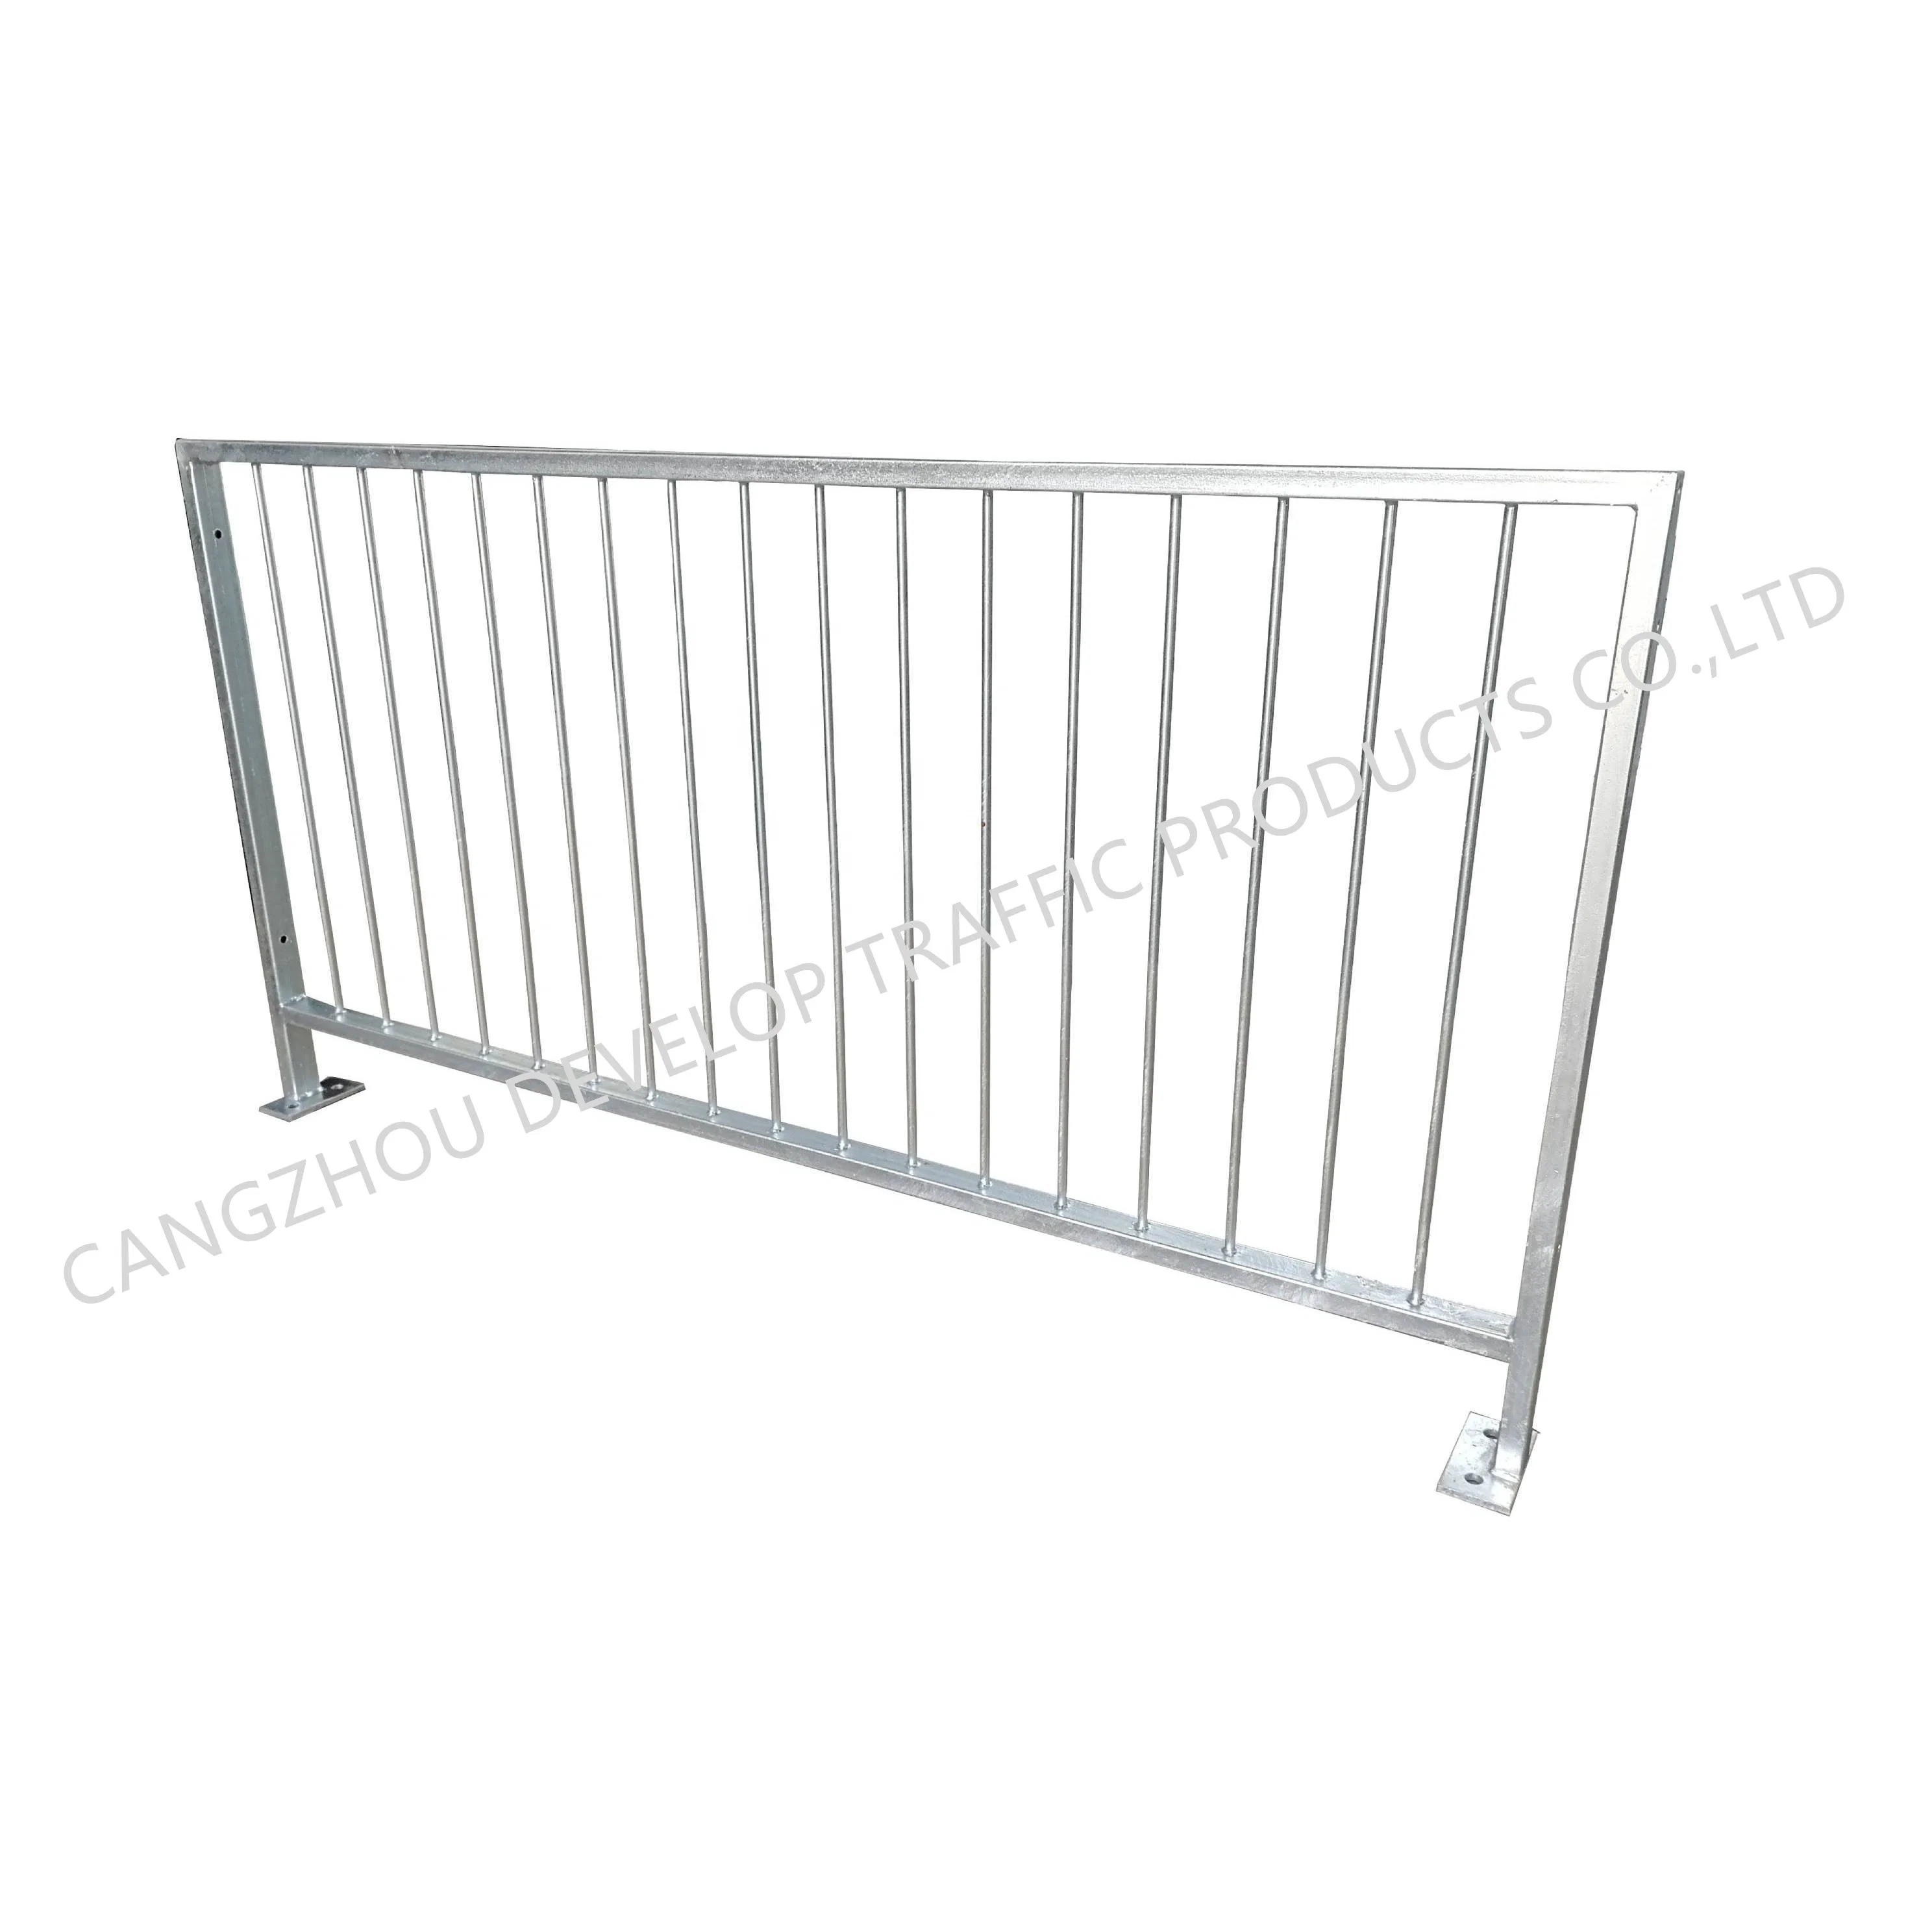 High quality/High cost performance Road Safety Highway Safety Fence Product